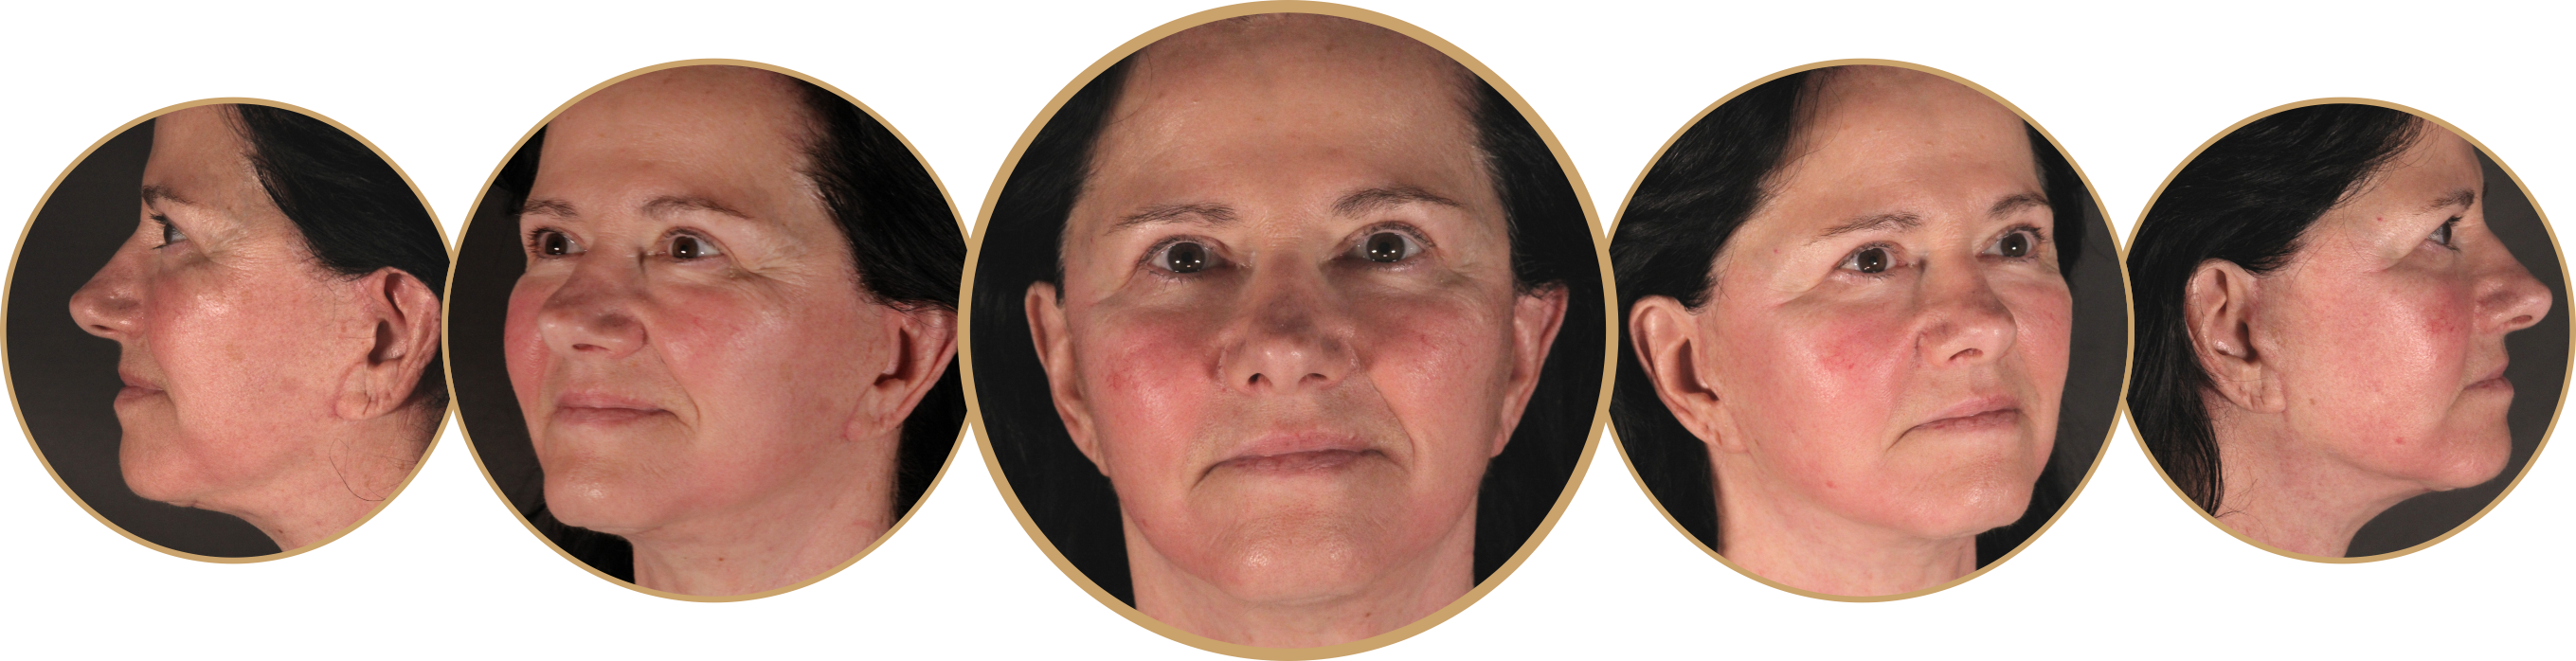 Five perspectives of Patient KVu's face 8 weeks after surgery.